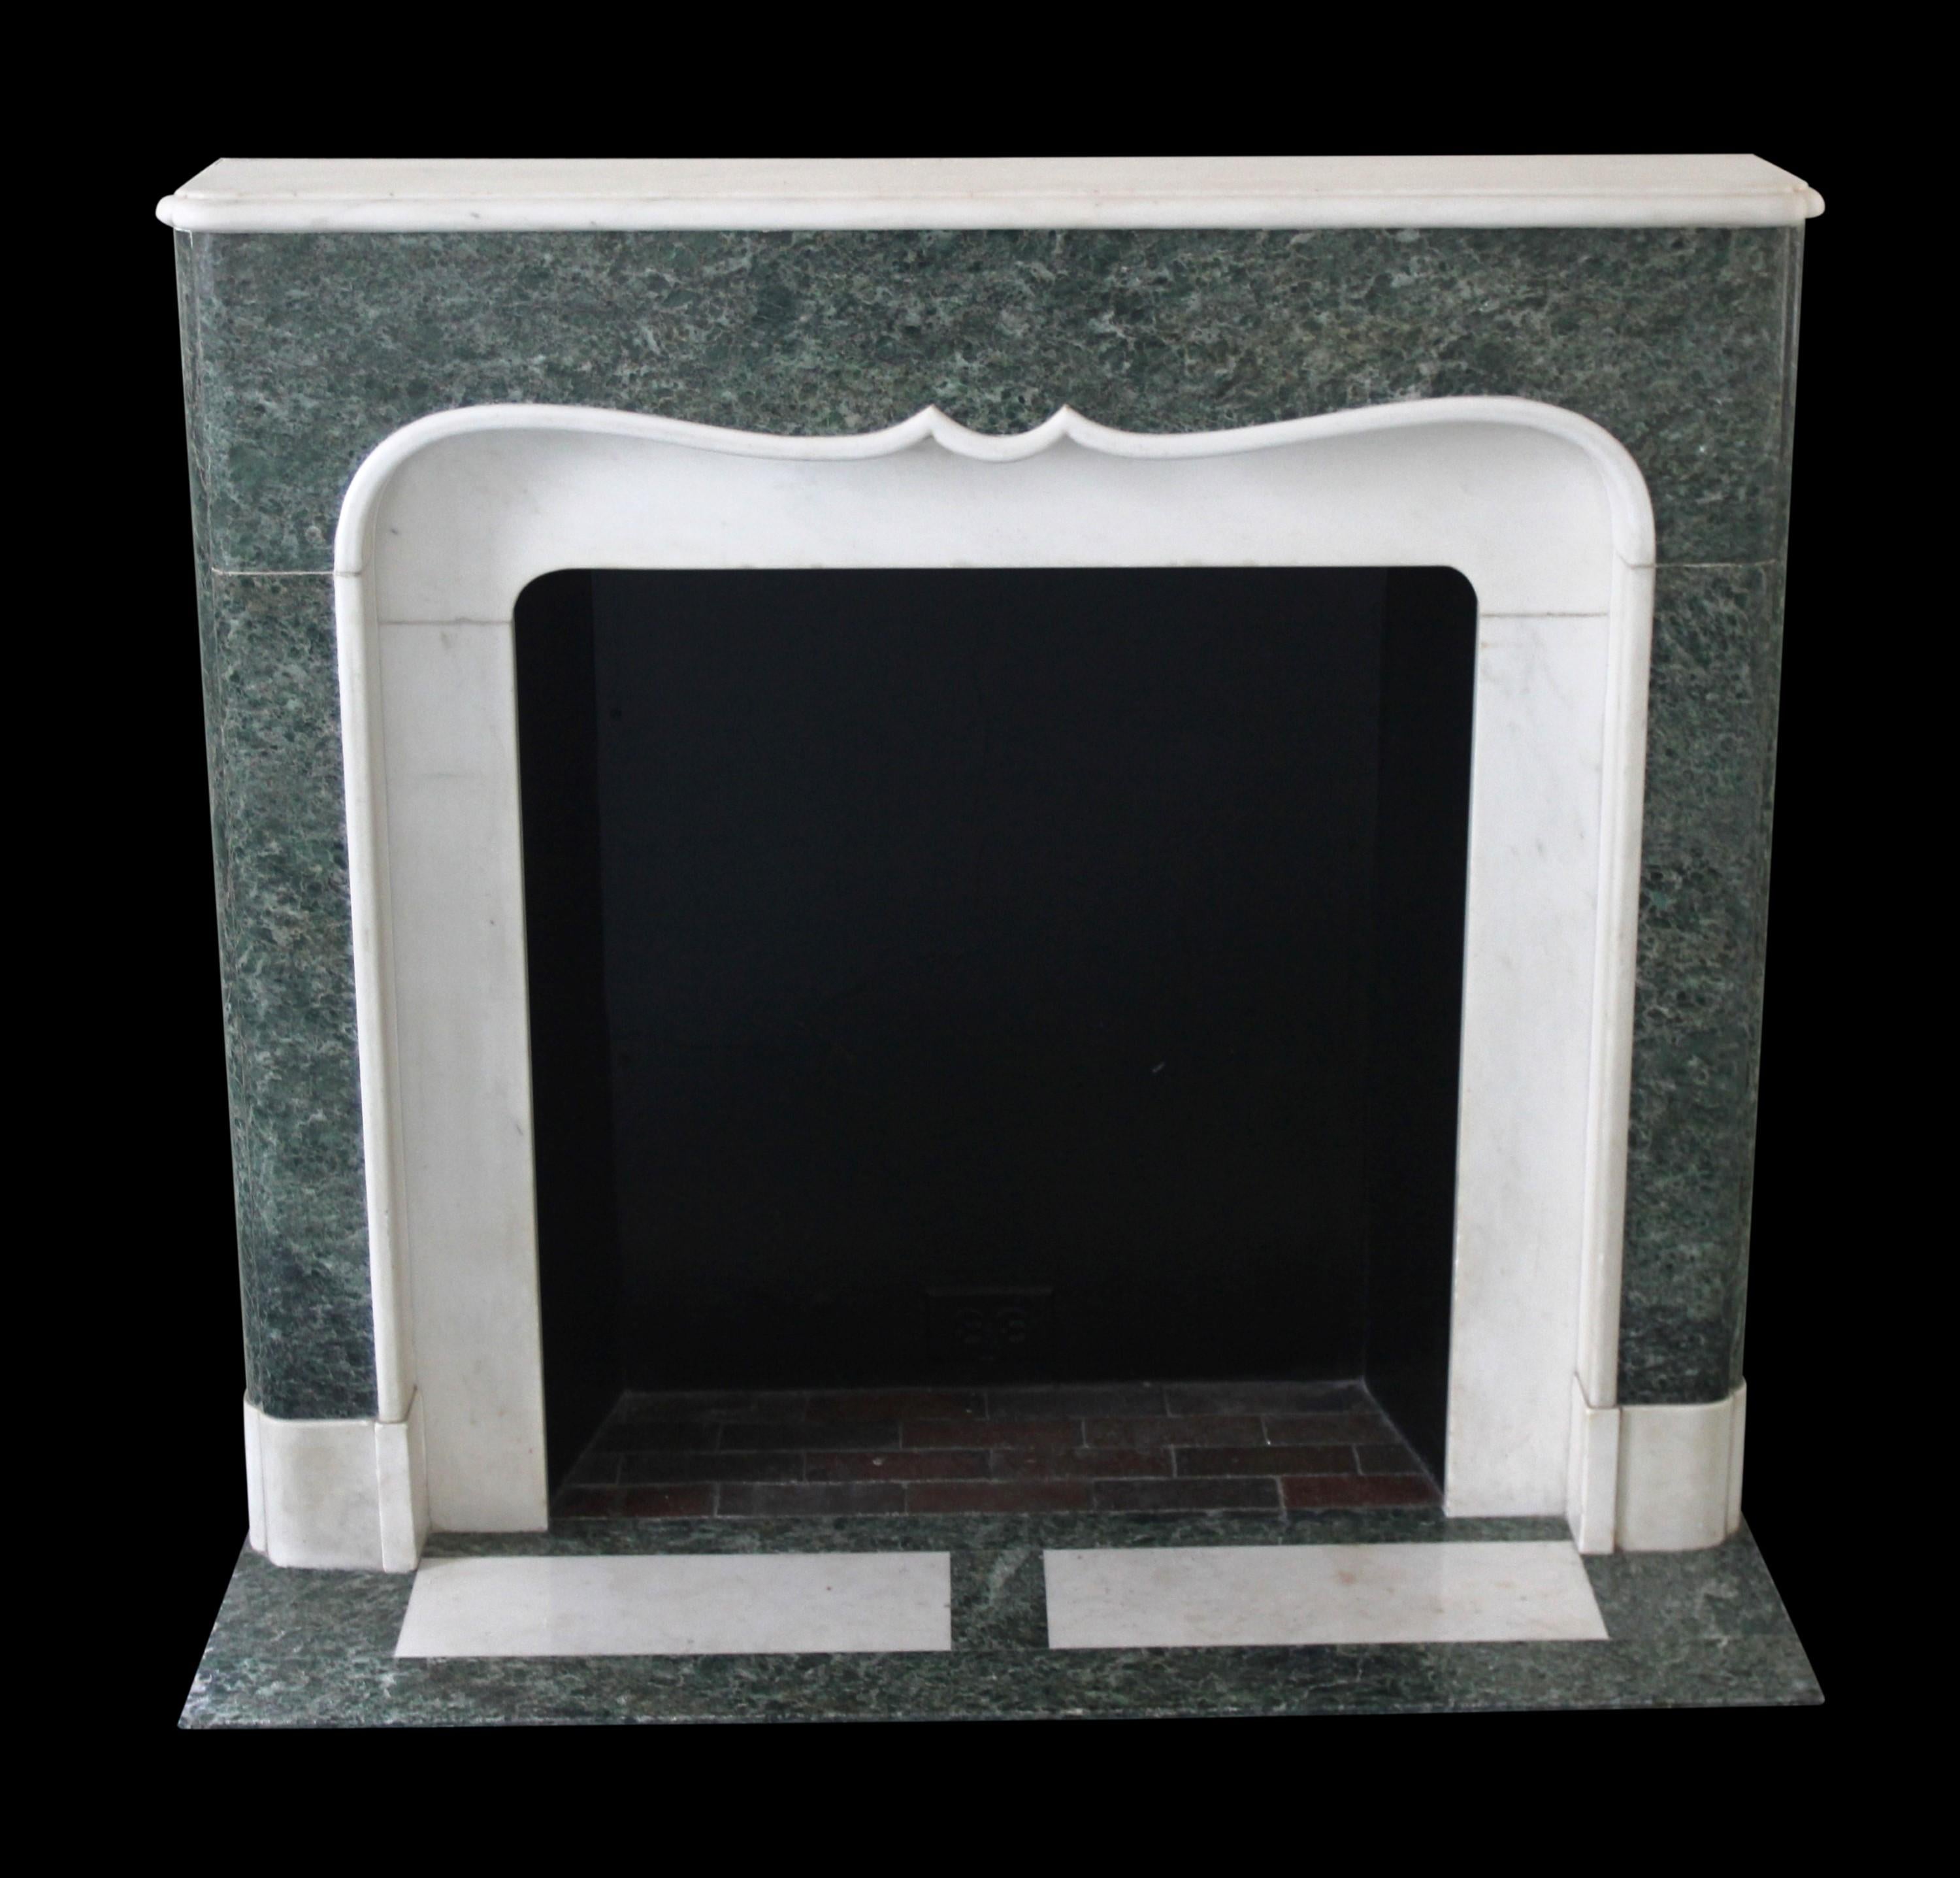 A distinctive mantel in a striking green and white statuary marble design, sourced from the historic Waldorf Astoria. Accompanying this mantel is a complementary paneled hearth, creating a harmonious ensemble. The standout feature of this mantel is